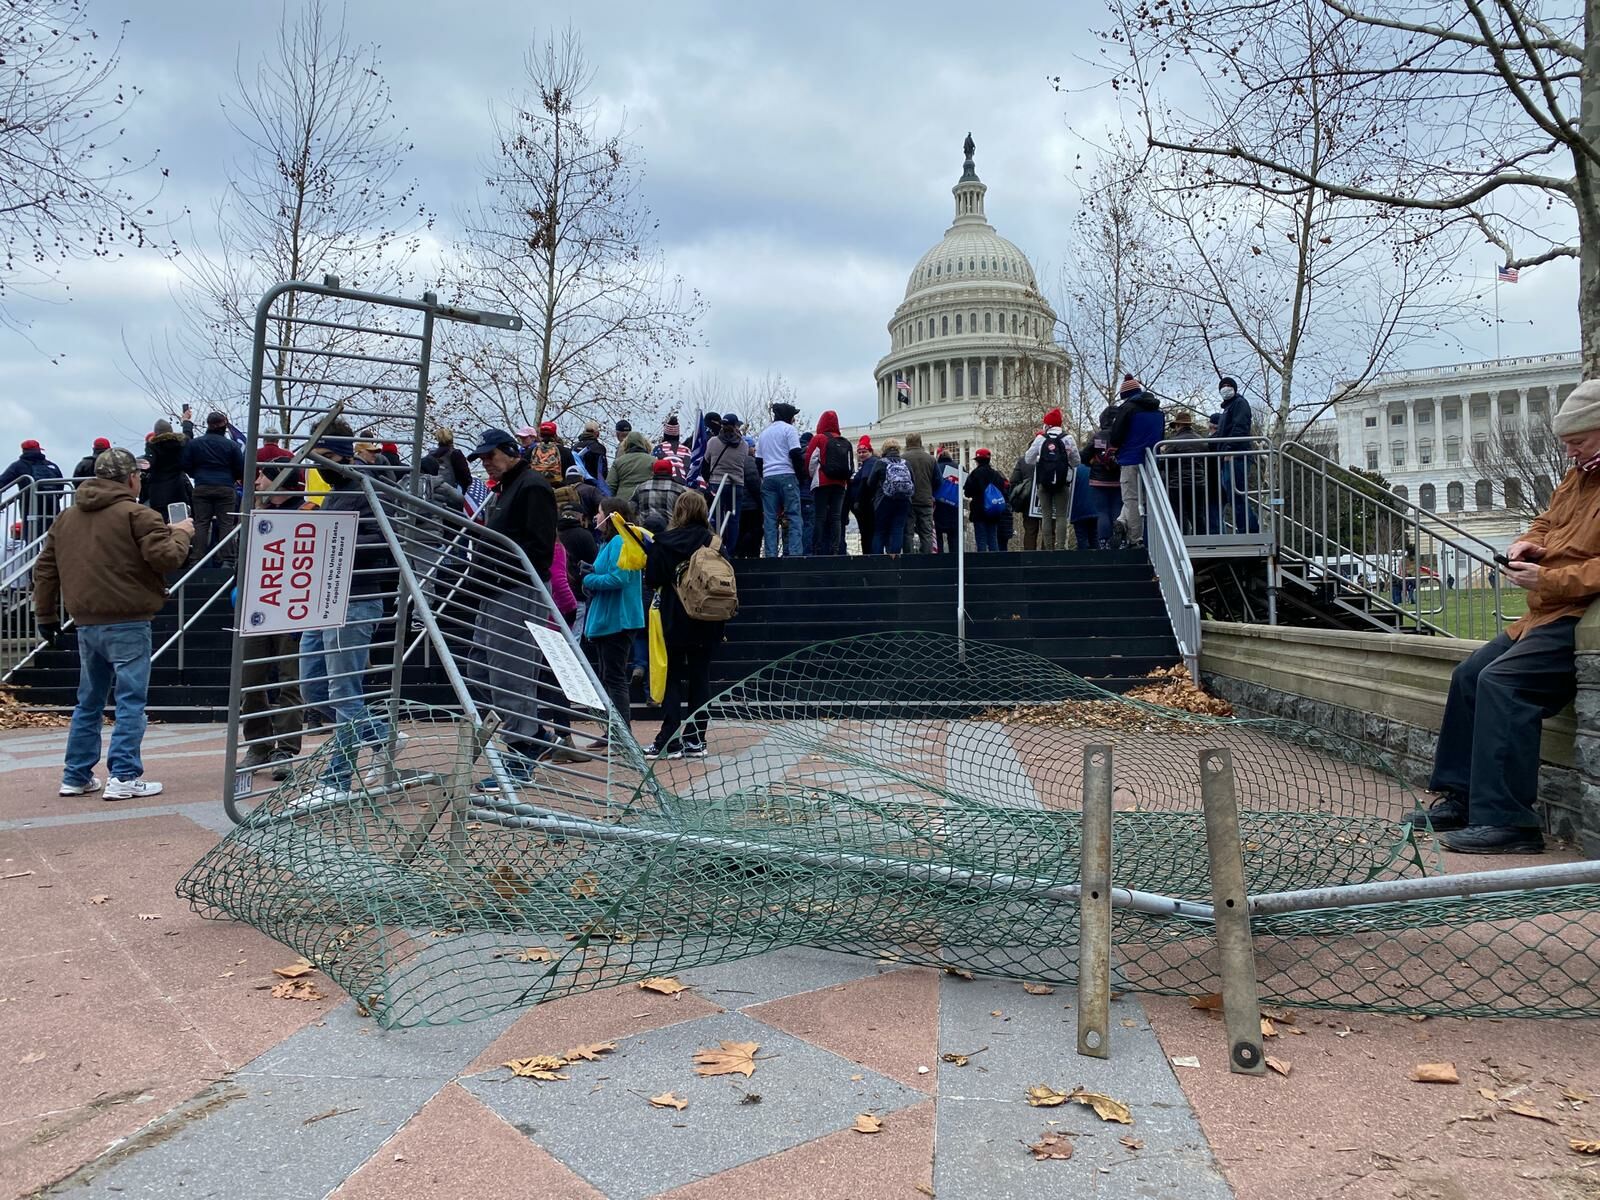 Chaos at Capitol as Pro-Trump protesters hit DC streets for 2nd day | WTOP